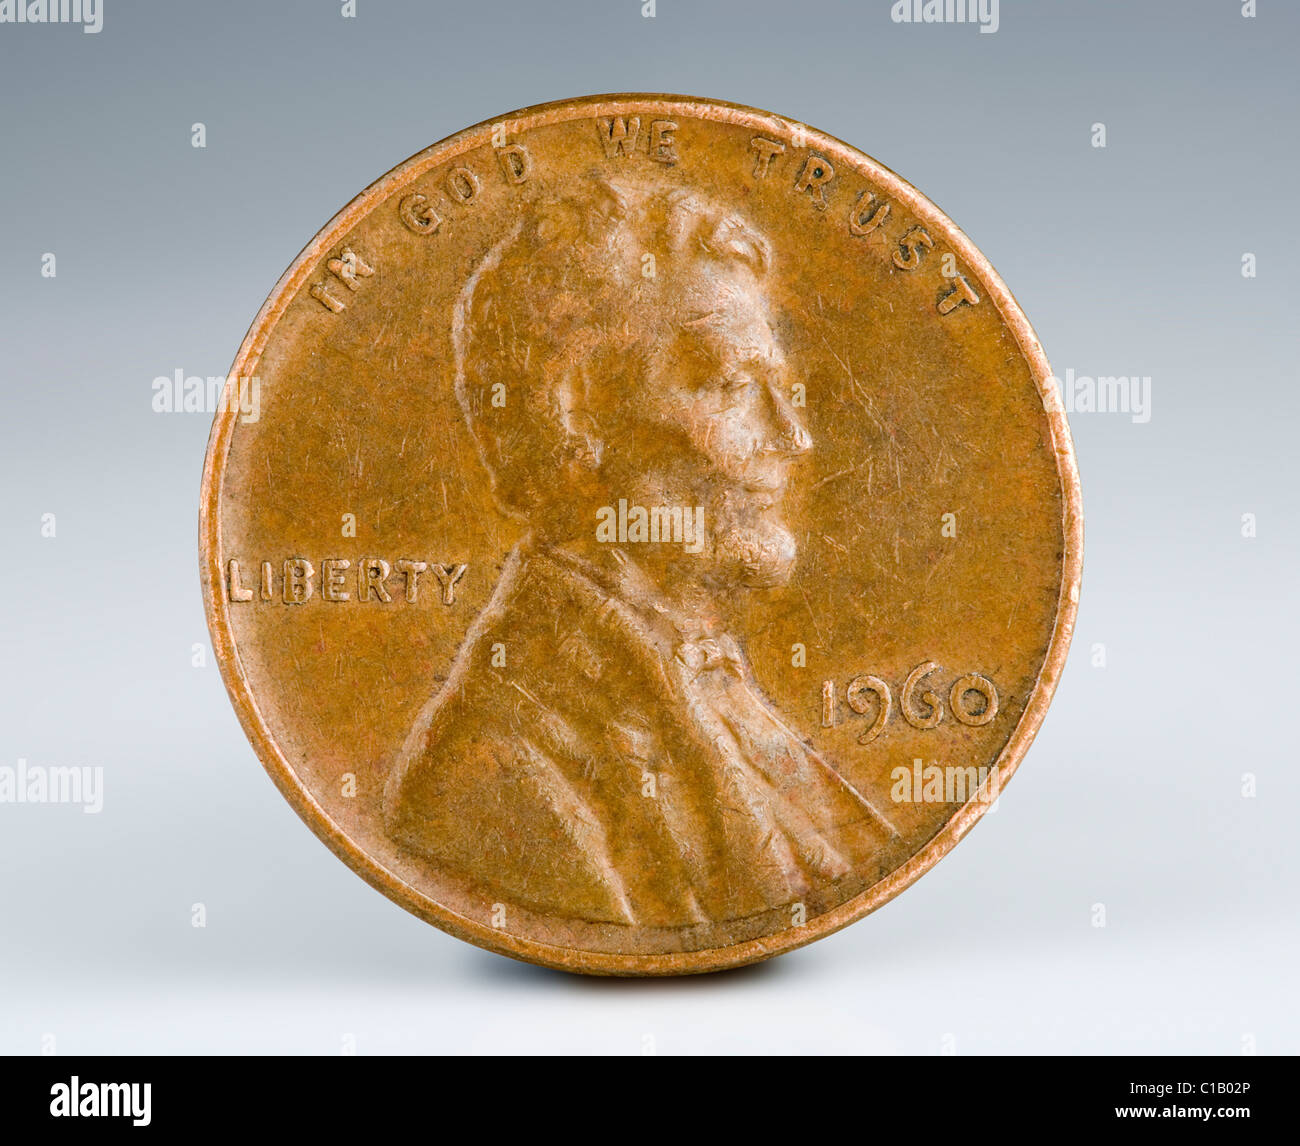 US 1 cent copper penny from 1960. Pennies made prior to 1983 had a much higher copper content and as a result of rising metals Stock Photo